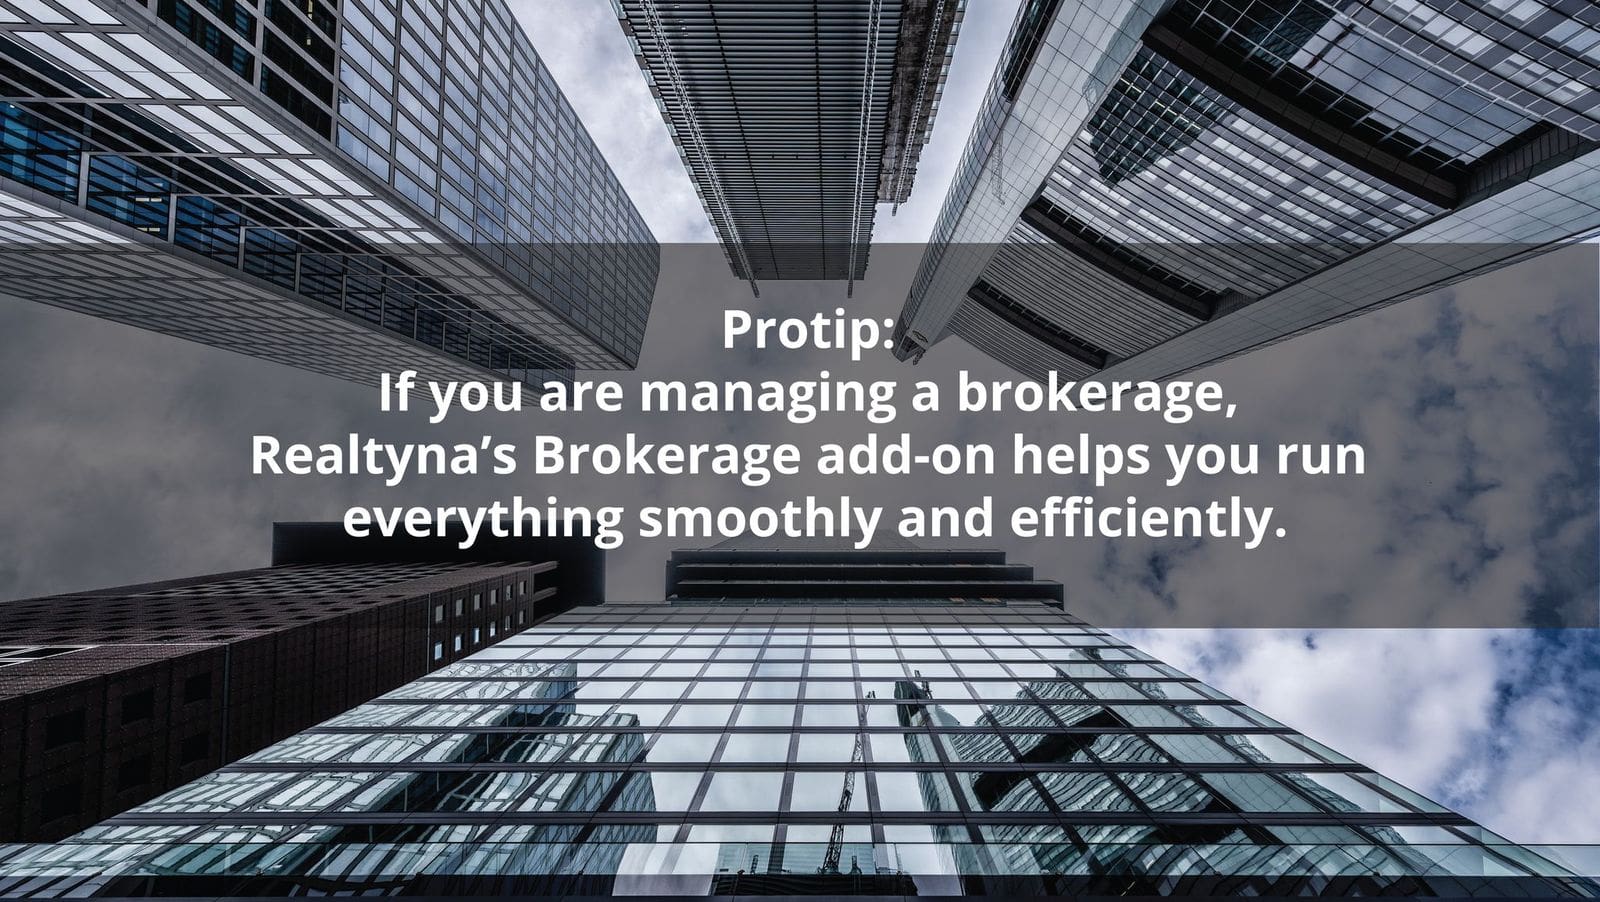 Realtyna's Brokerage Add-on